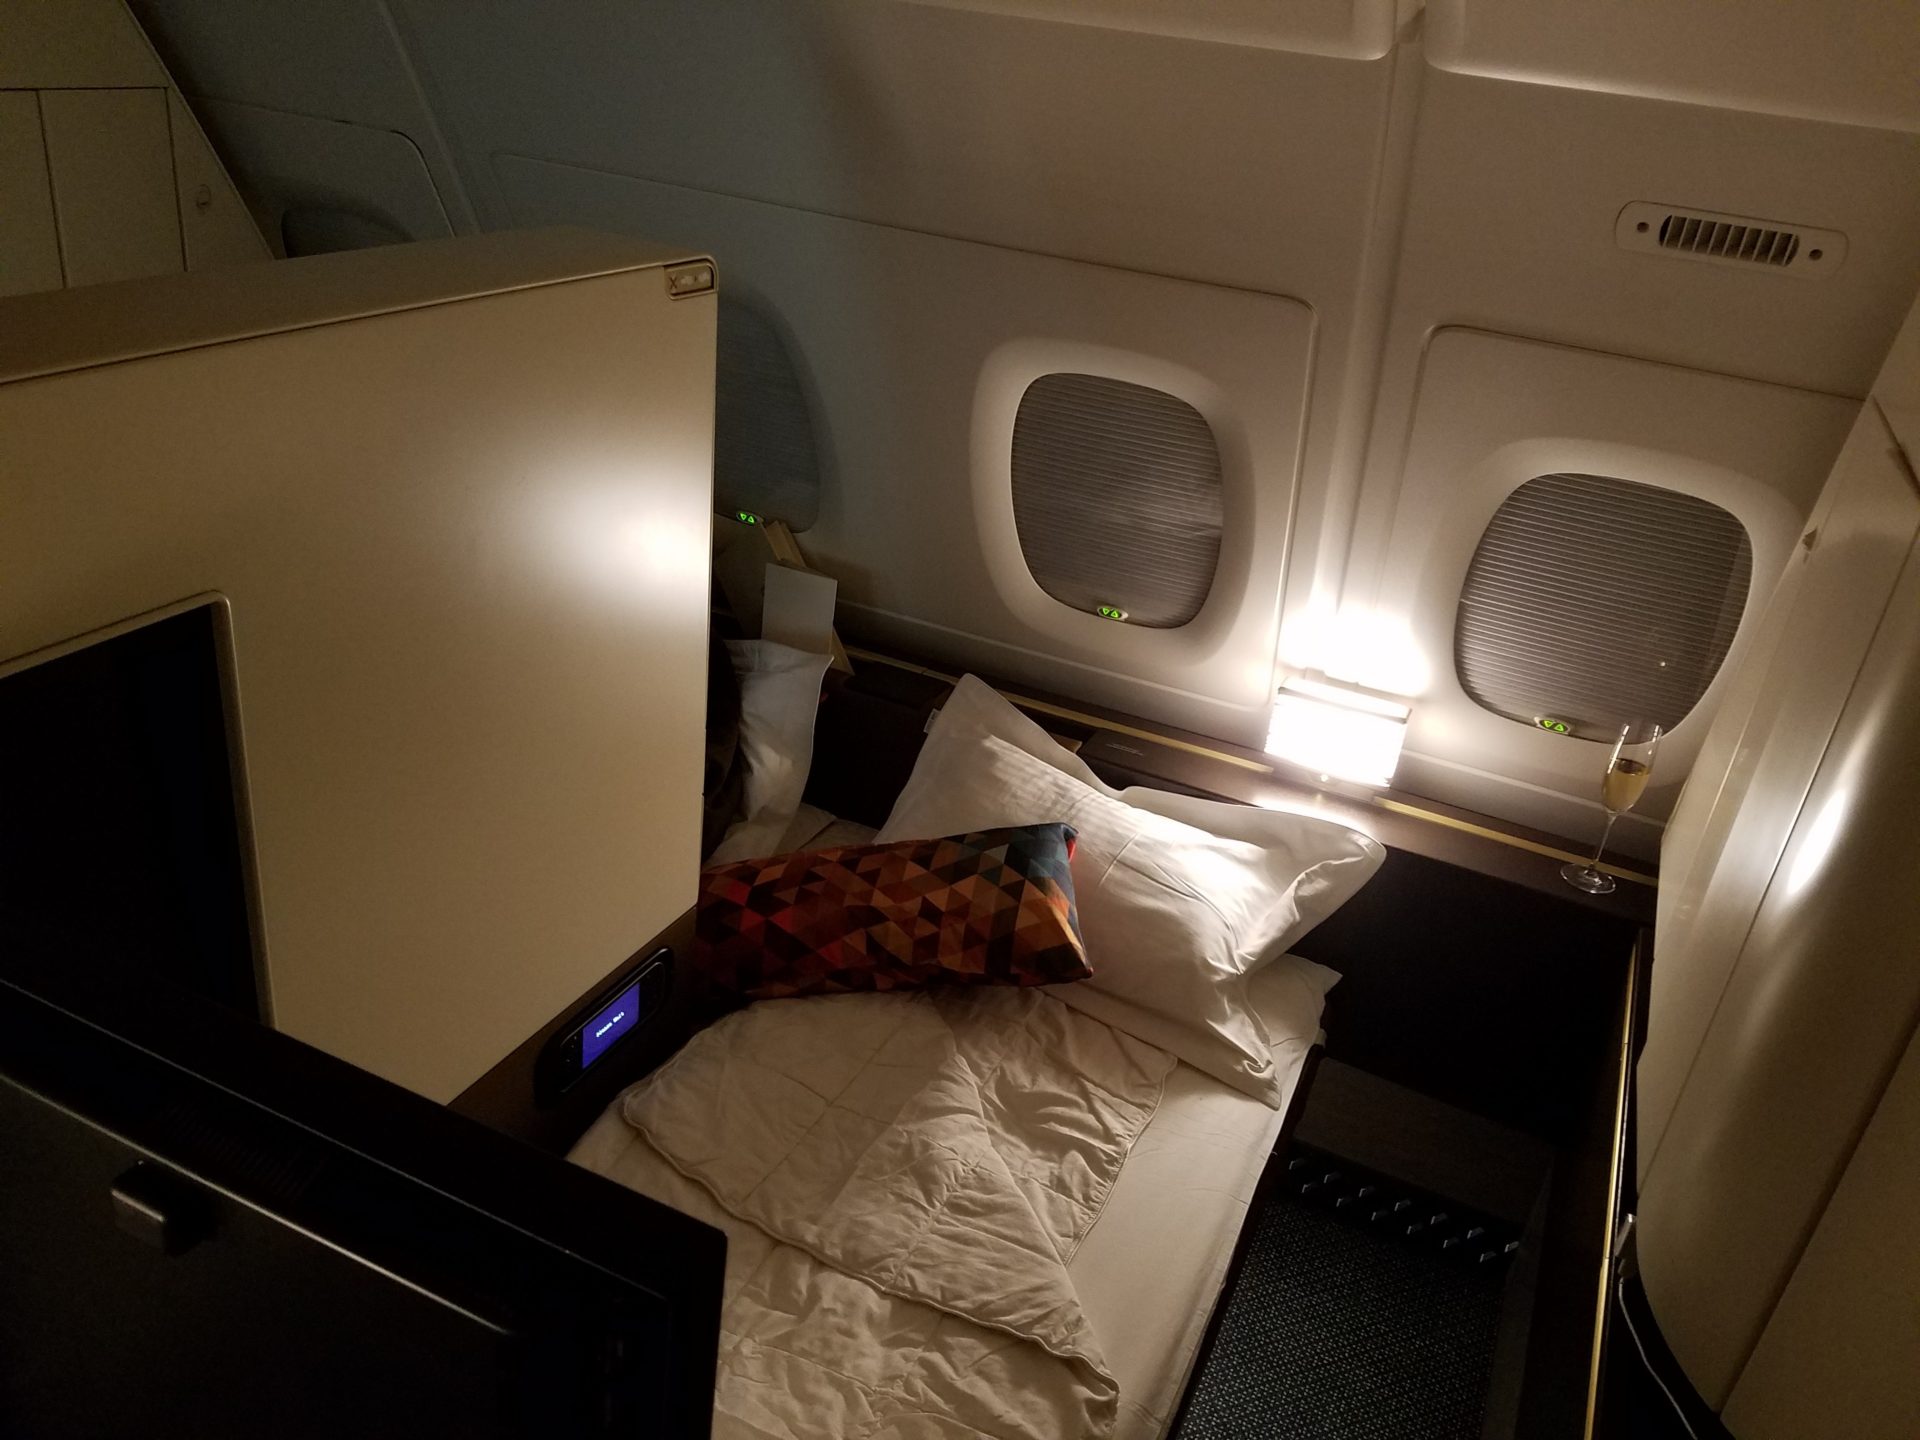 a bed in an airplane